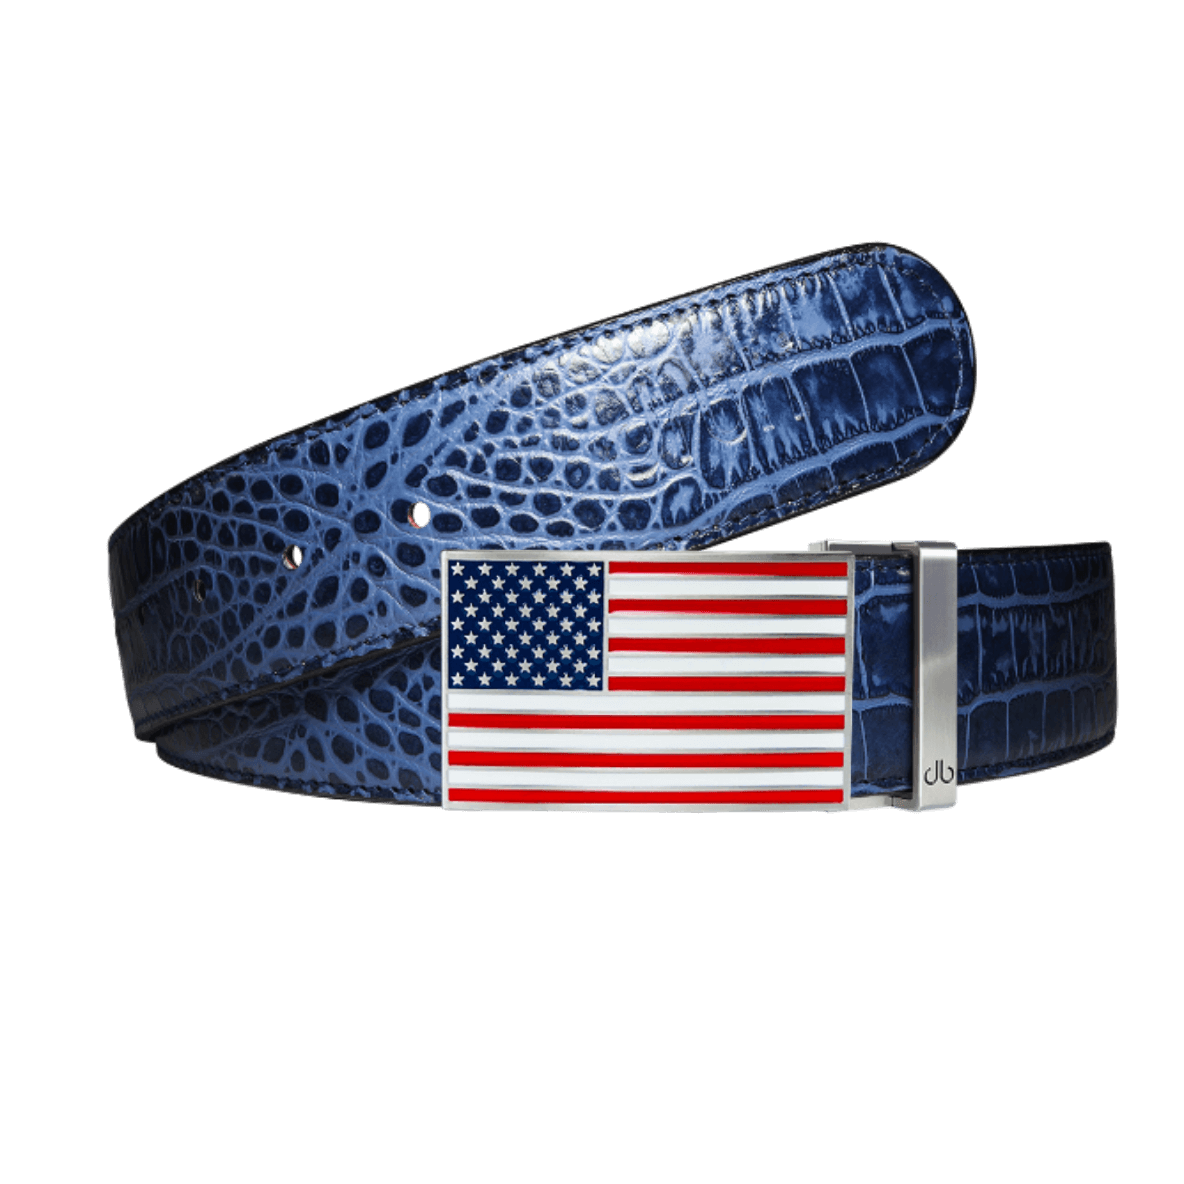 Blue Crocodile leather strap with American flag buckle